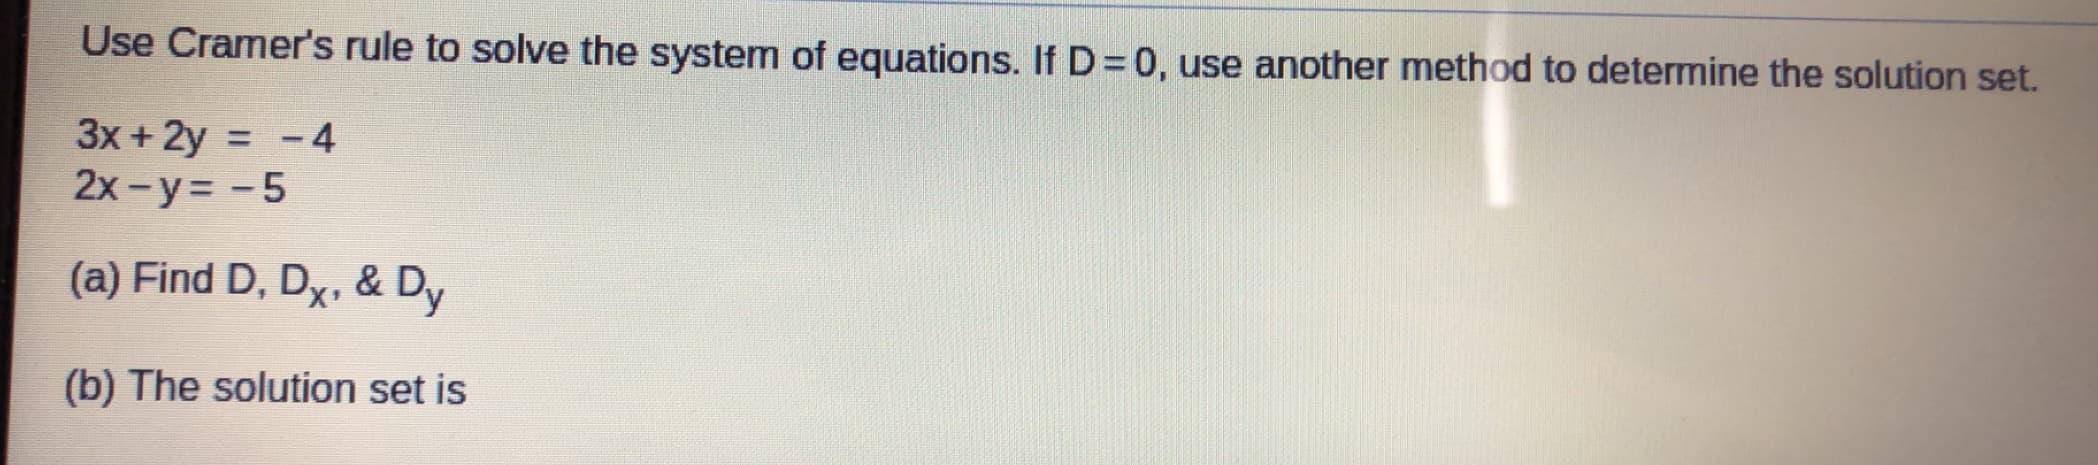 Use Cramer's rule to solve the system of equations. If D= 0, use another method to determine the solution set.
3x + 2y = -4
2x-y= -5
(a) Find D, Dx, & Dy
(b) The solution set is
